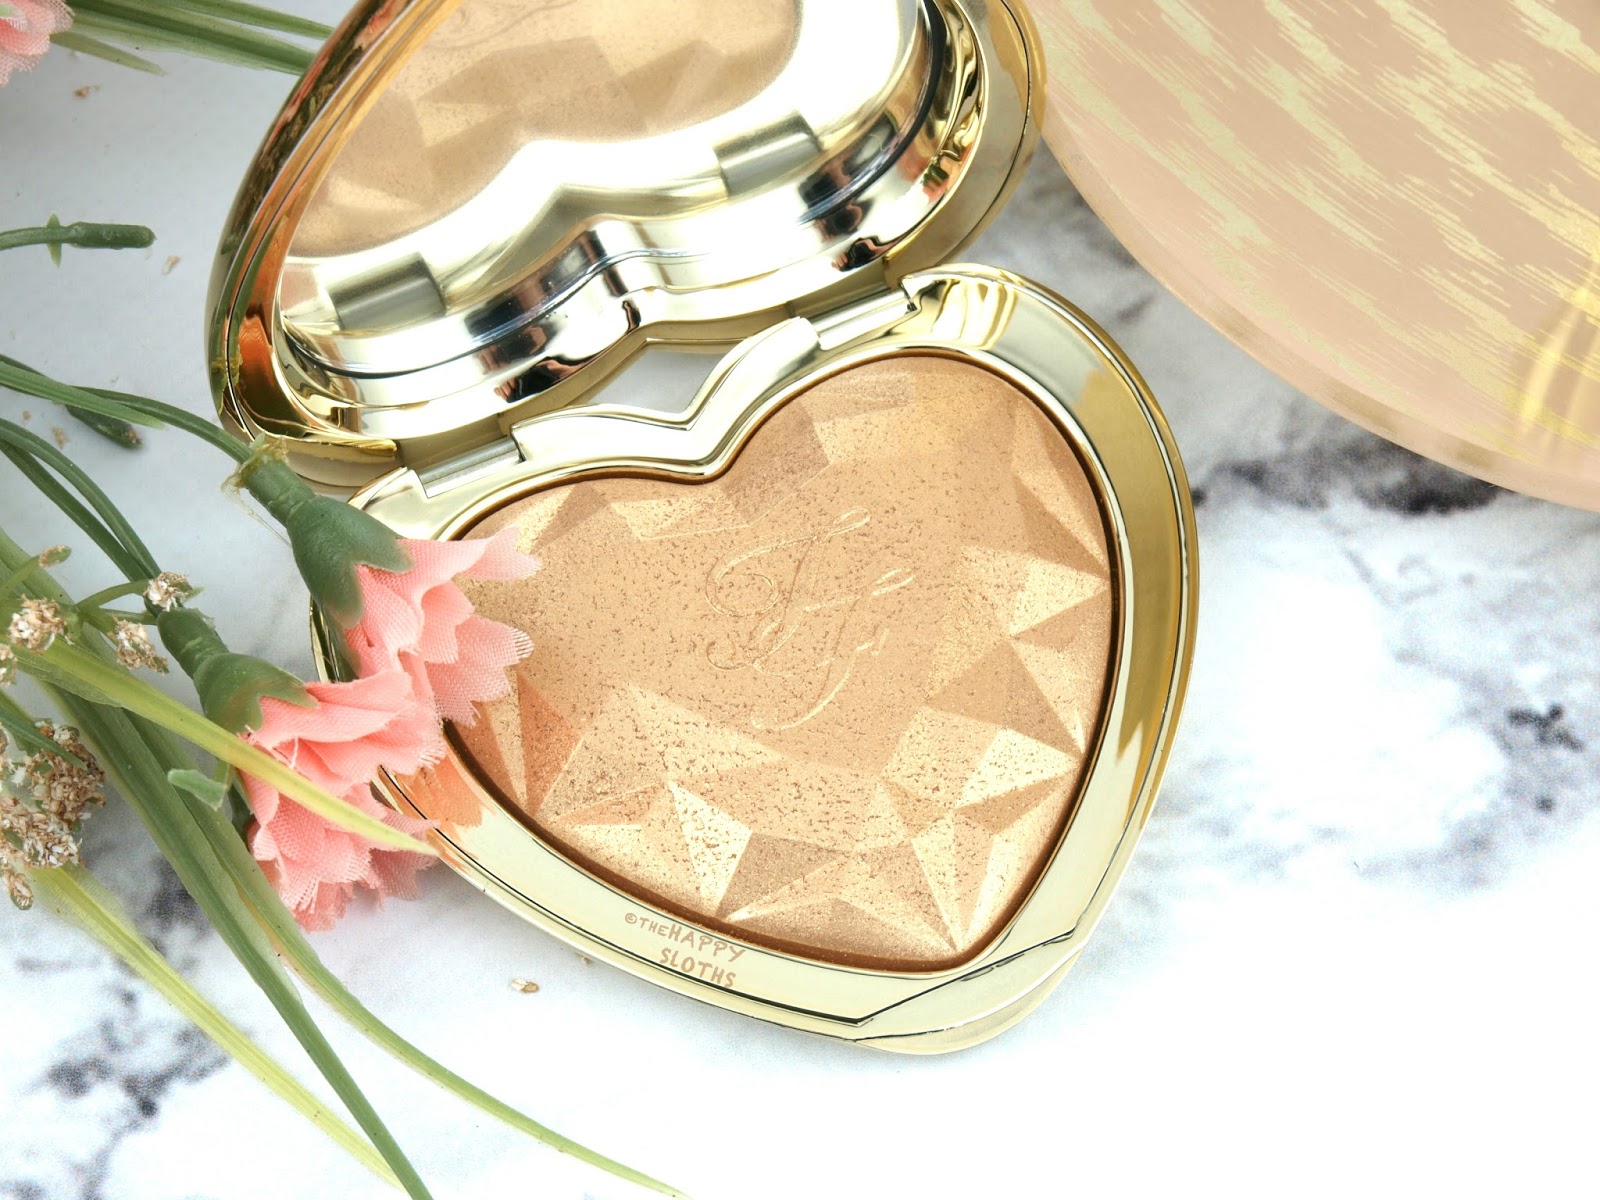 Too Faced Love Light Prismatic Highlighter in "You Light Up My Life": Review and Swatches